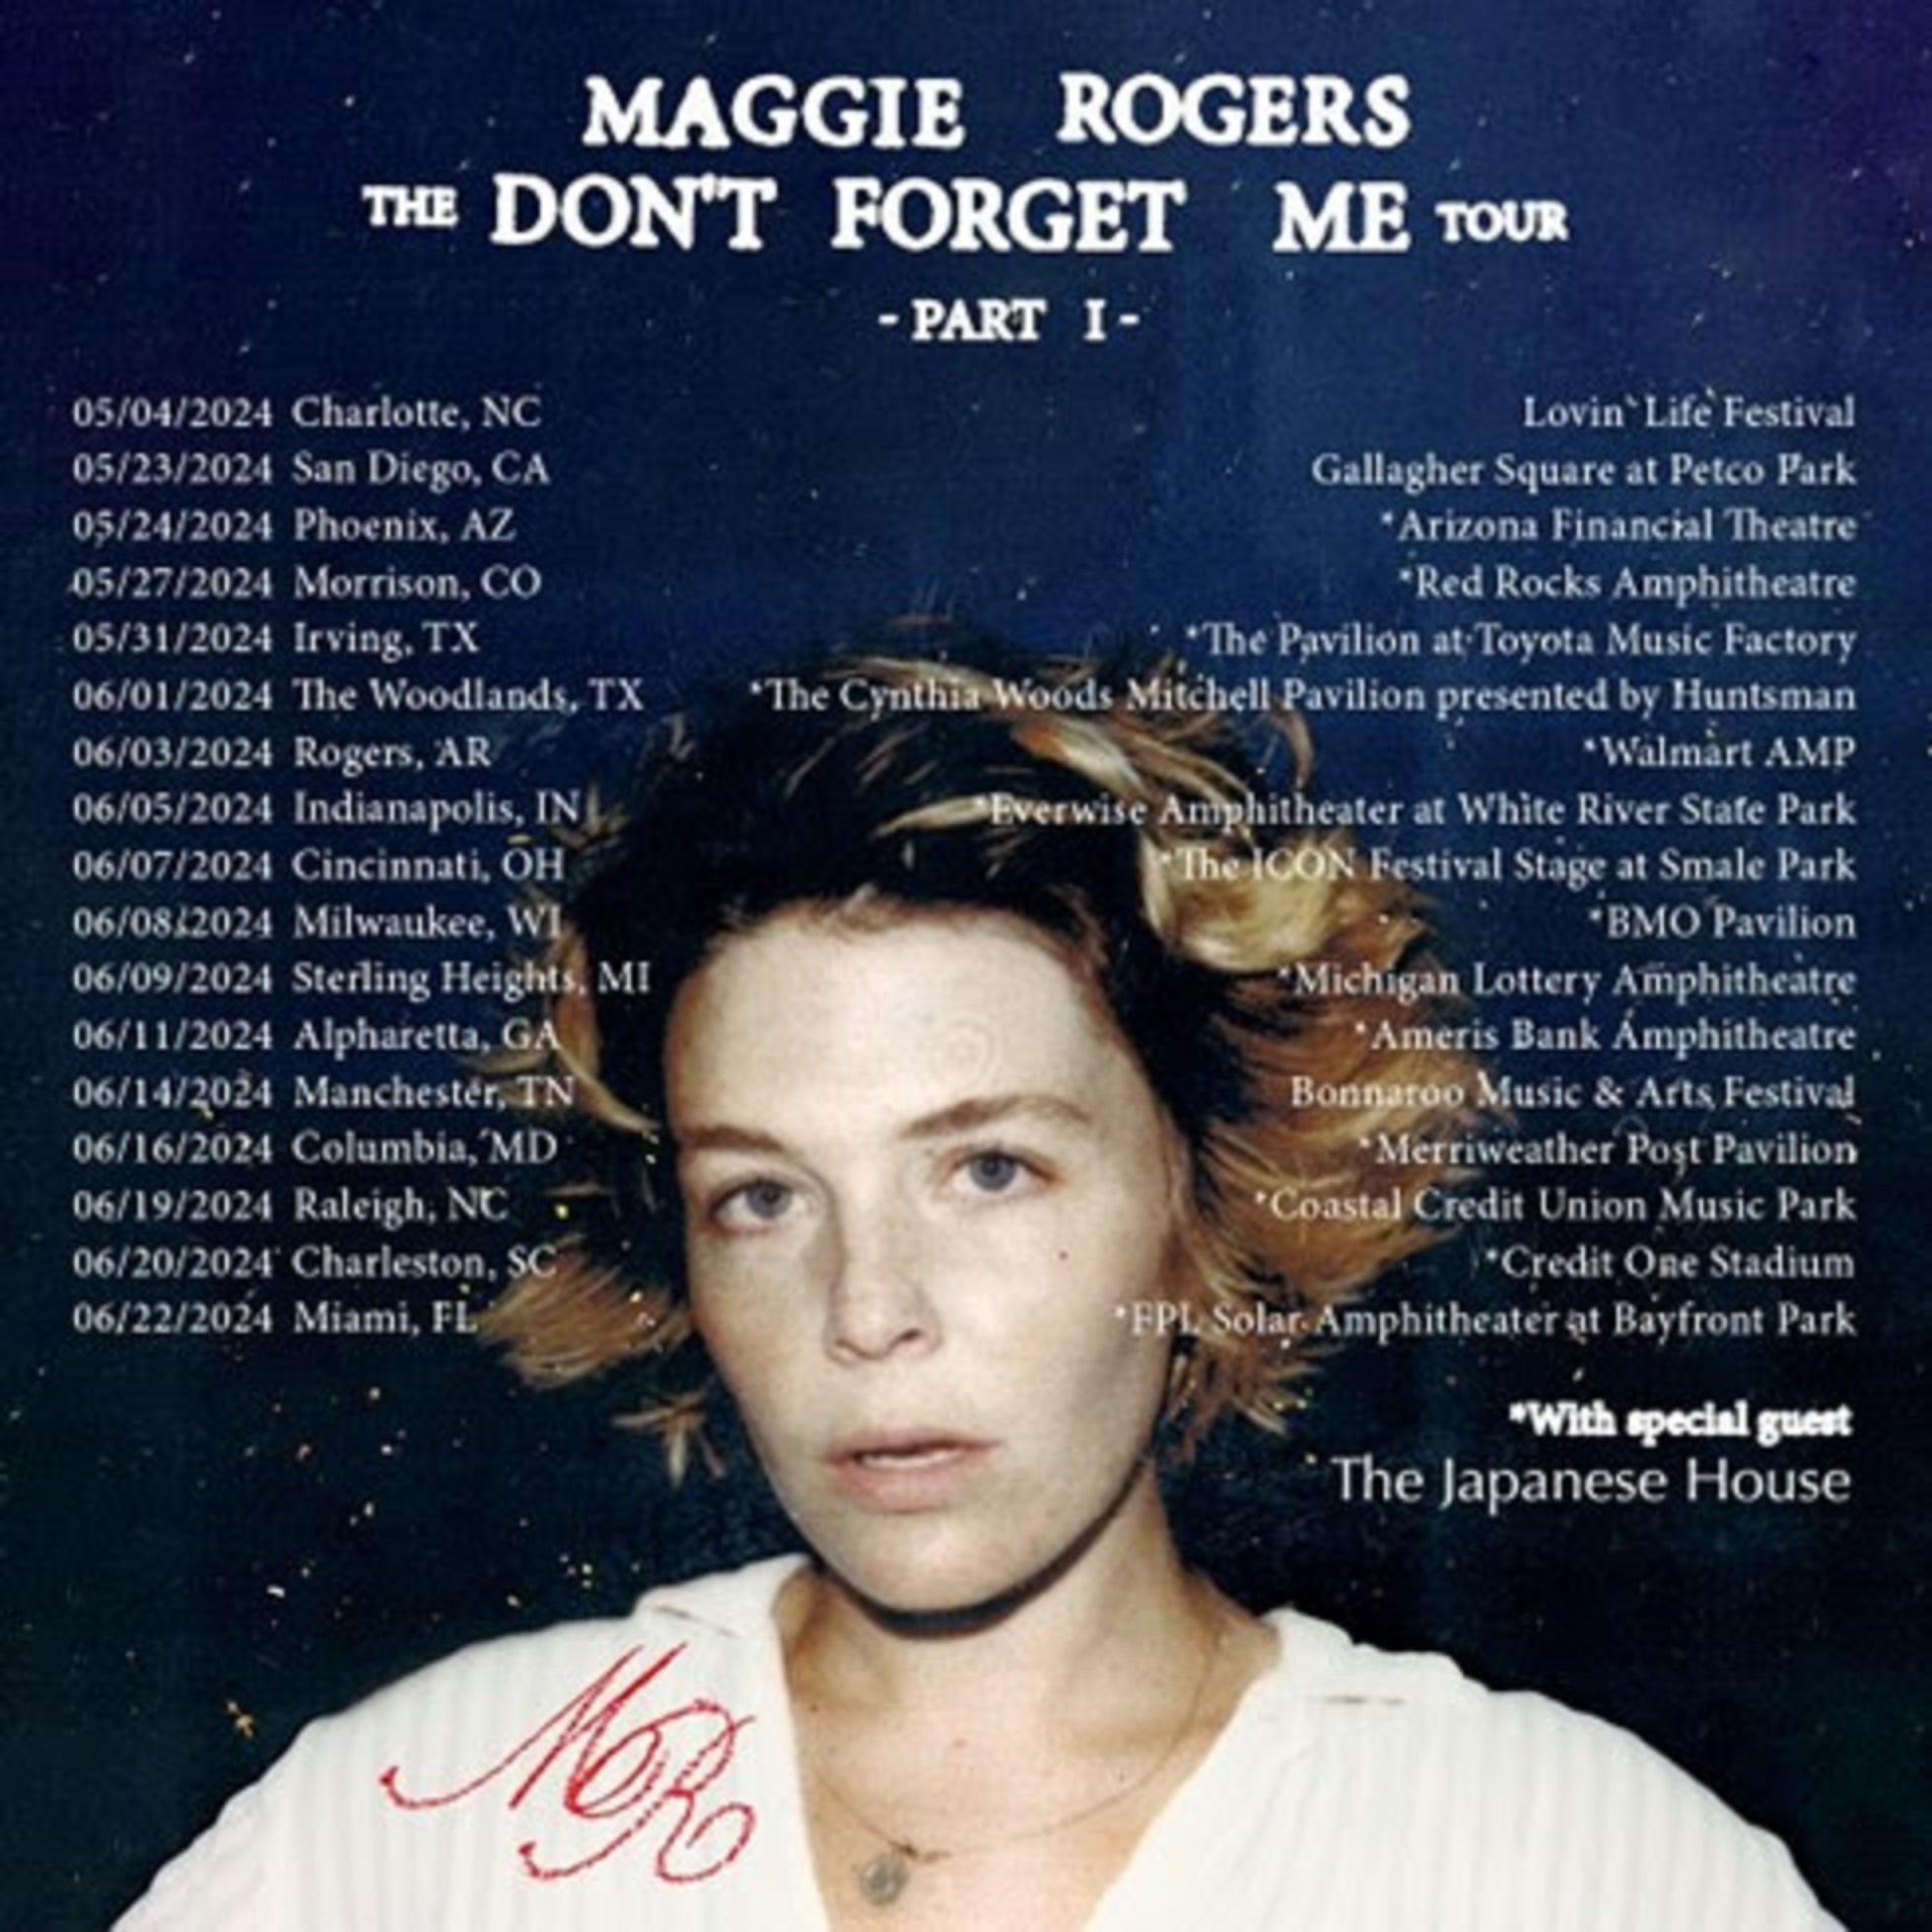 MAGGIE ROGERS ANNOUNCES PART 1 OF THE DON’T FORGET ME TOUR, LAUNCHING MAY 23